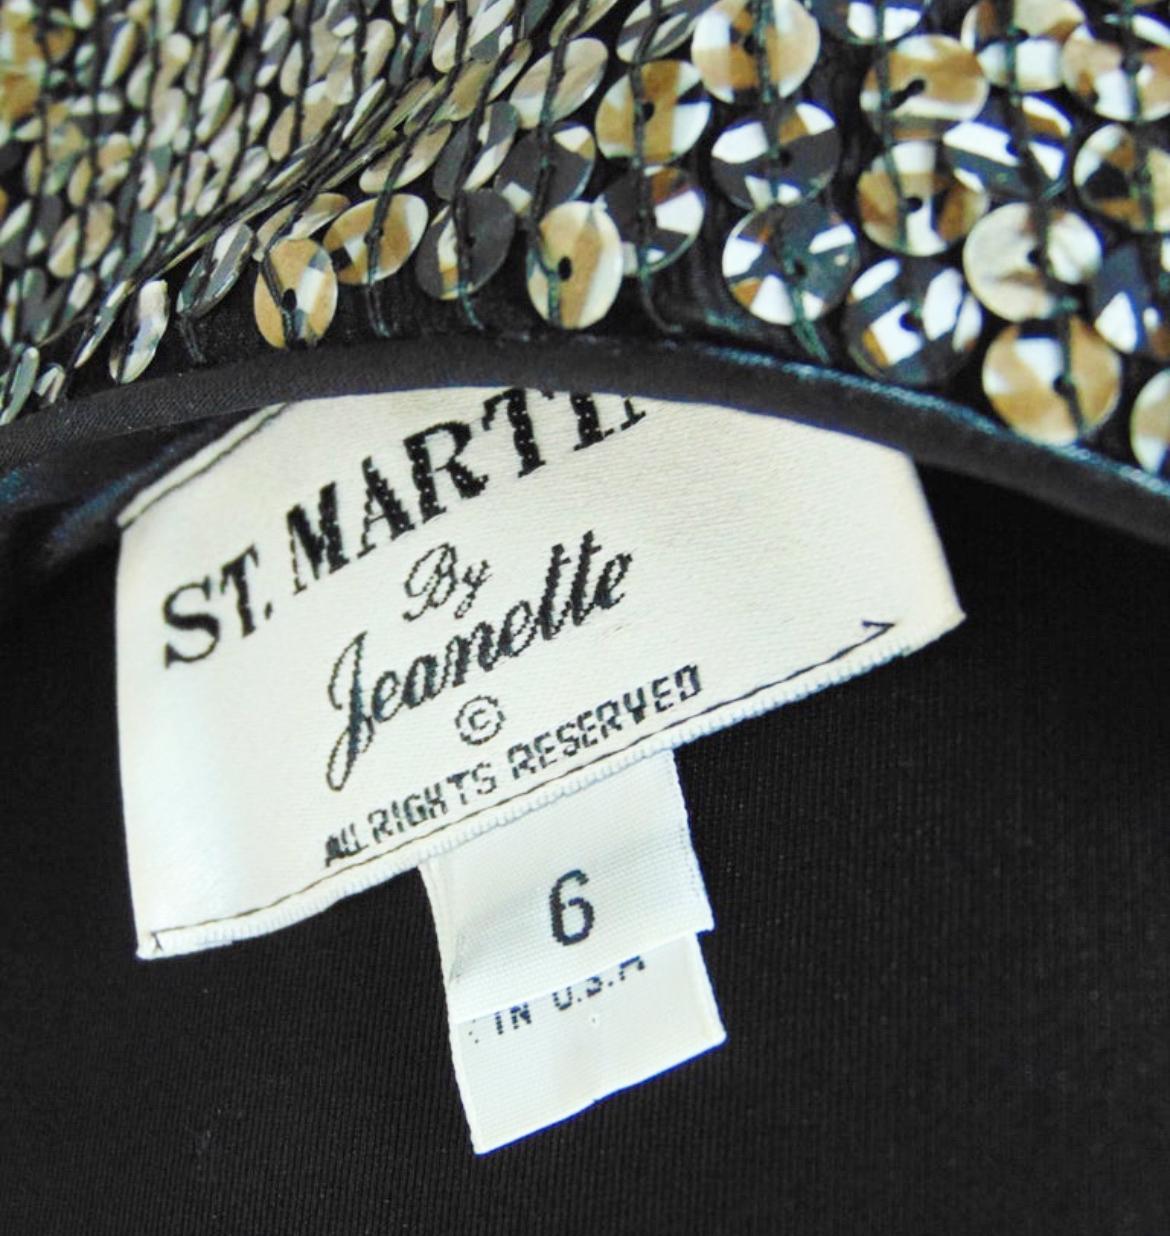 St. Martin by Jeanette Cocktail Dress Embellished Evening Wear Rare 90s Size 6  For Sale 9